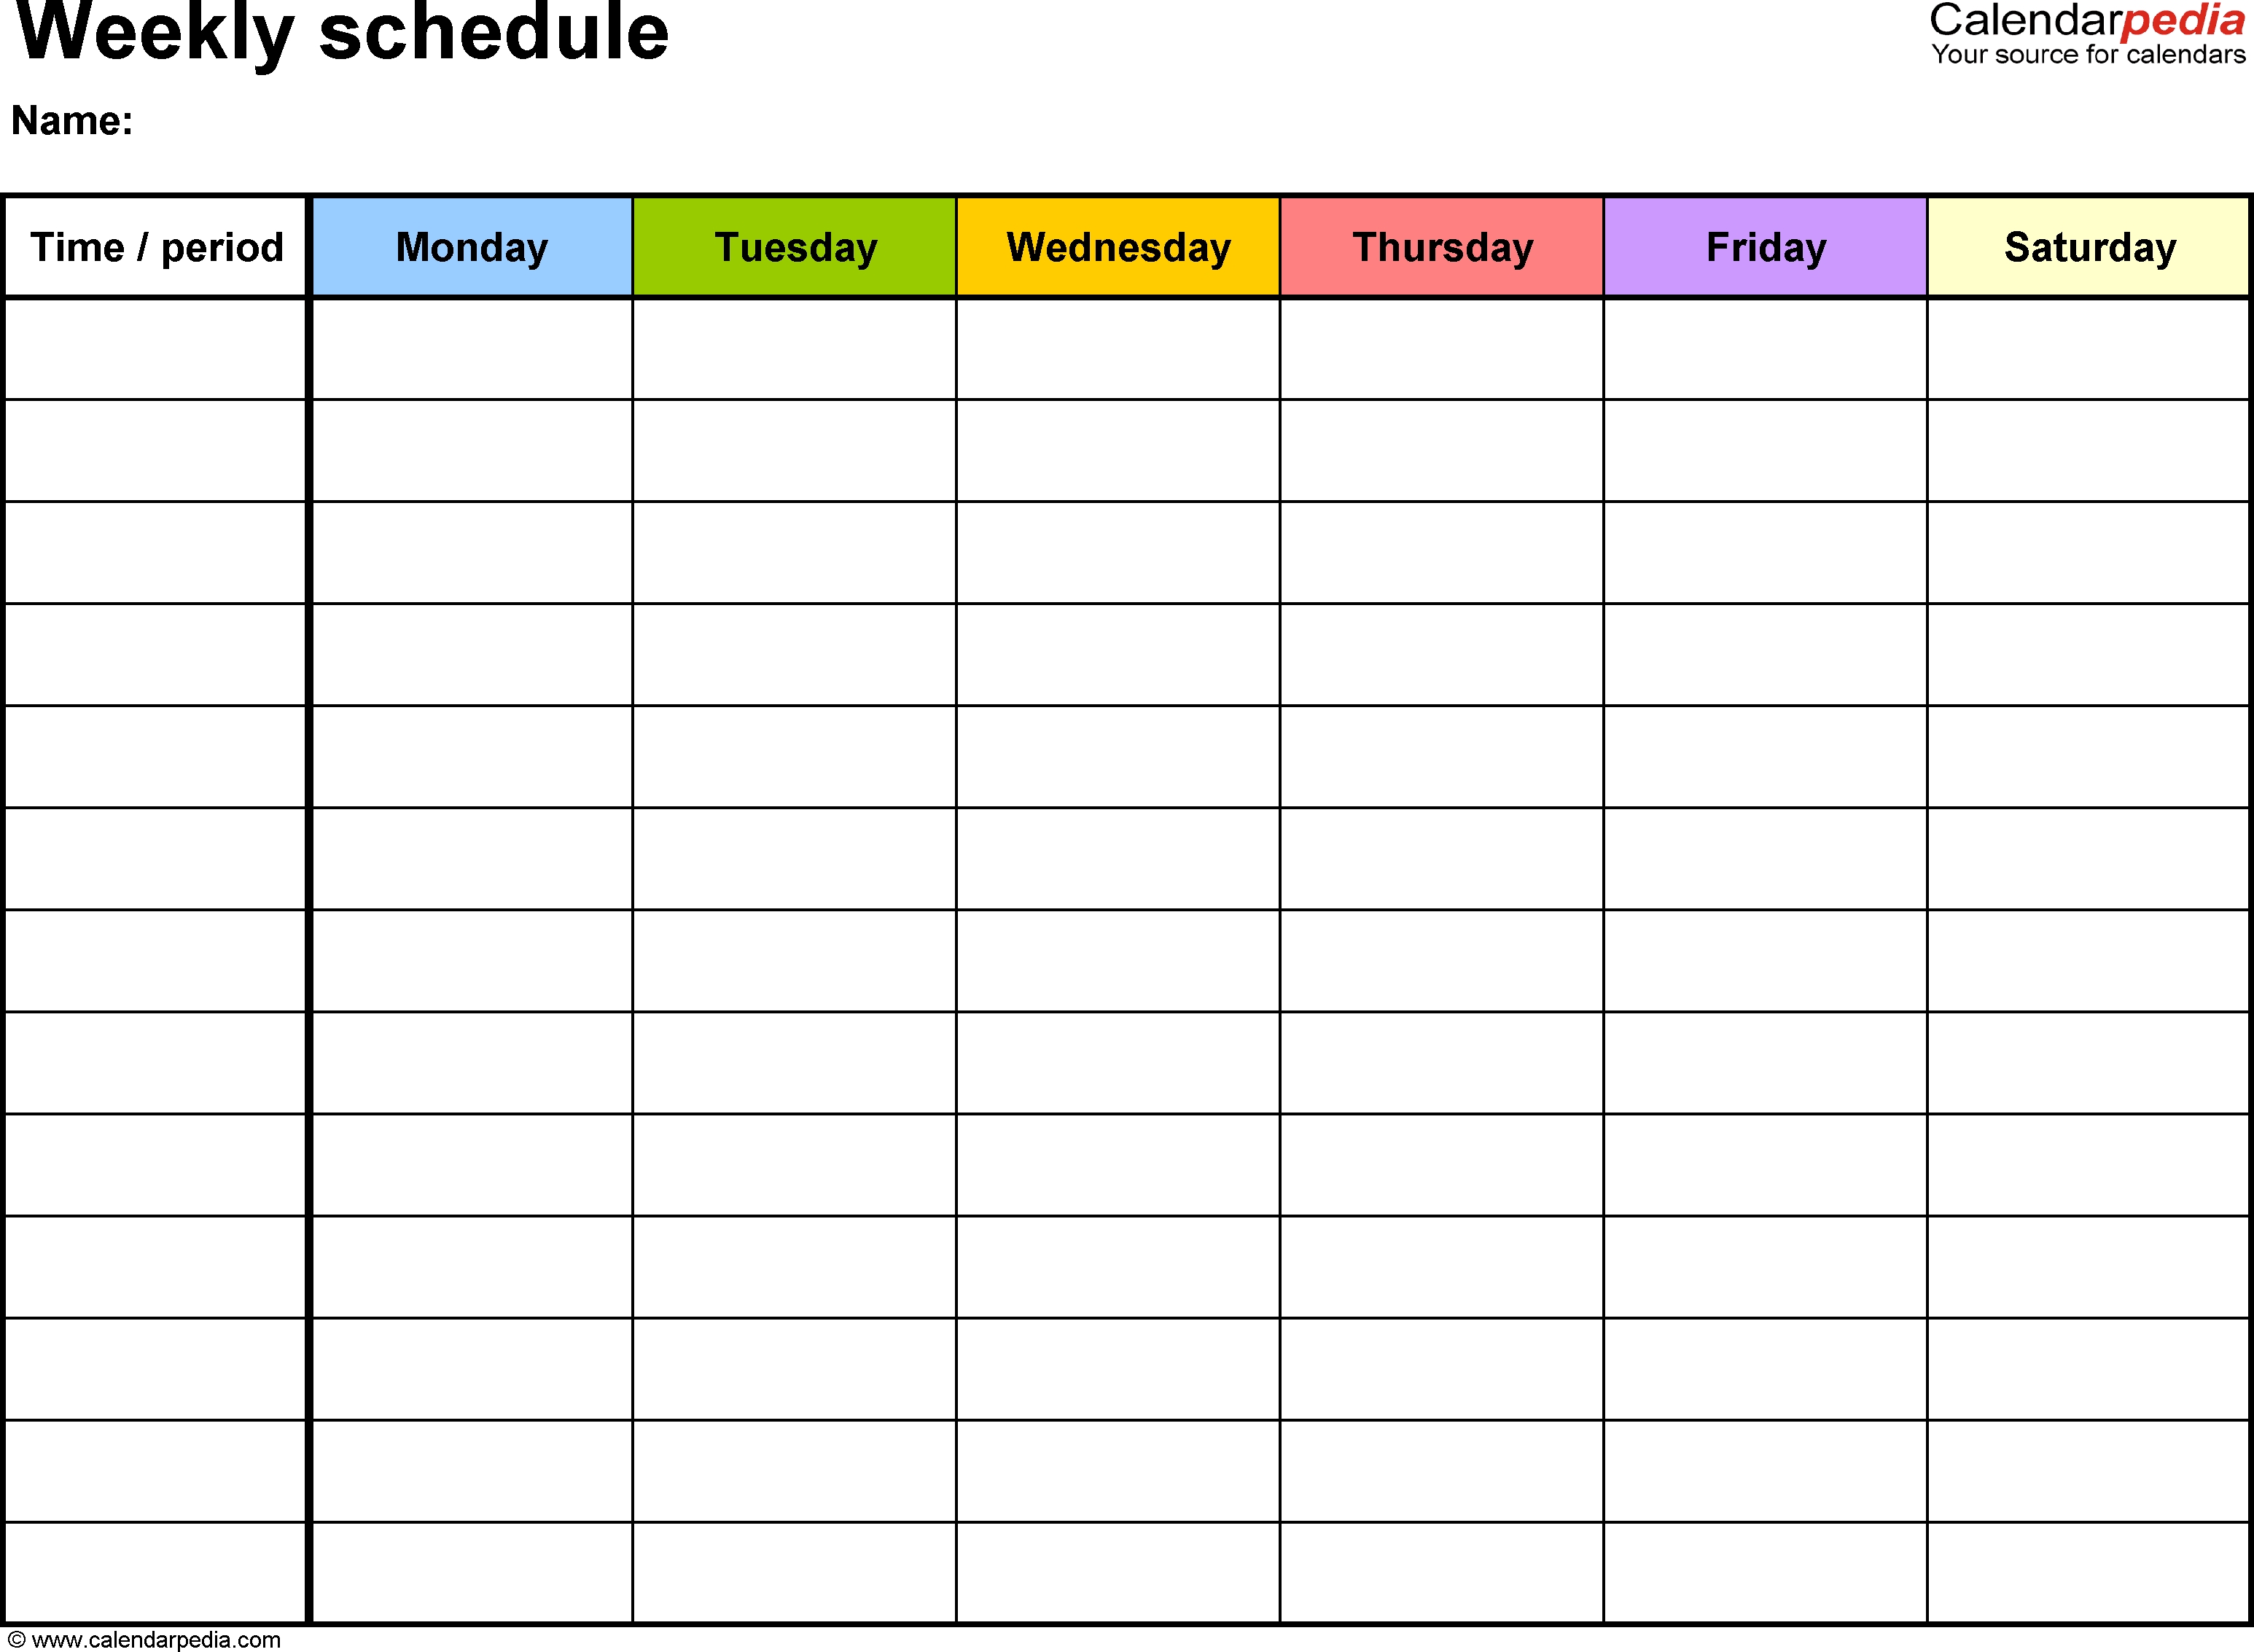 Free Weekly Schedule Templates For Word - 18 Templates regarding Monday Though Friday Timed Schedule